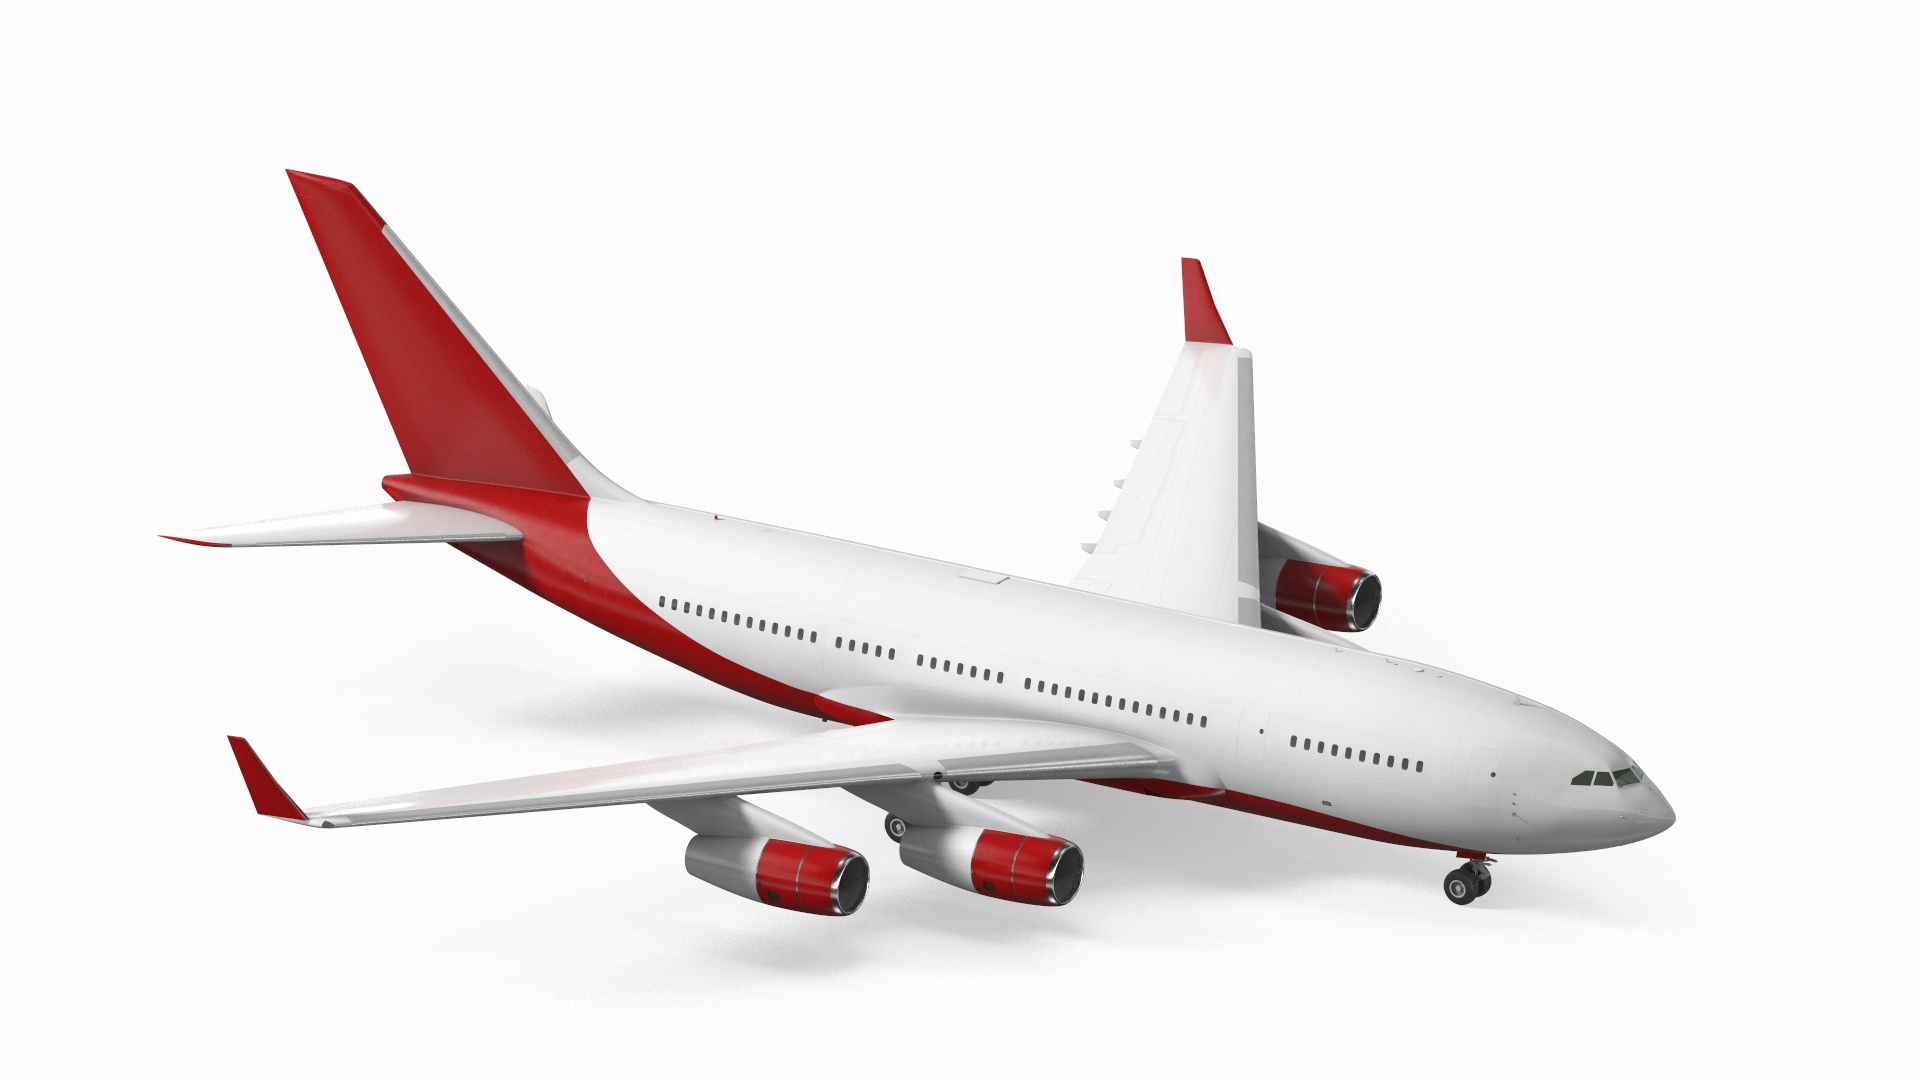 3D Long Range Plane Red Simple Interior Rigged model https://p.turbosquid.com/ts-thumb/or/w9Obny/mk/long_range_plane_red_simple_interior_rigged_360/jpg/1671148549/1920x1080/turn_fit_q99/d1f1b46763b83f07683b6f9697ddc639067b6b0b/long_range_plane_red_simple_interior_rigged_360-1.jpg